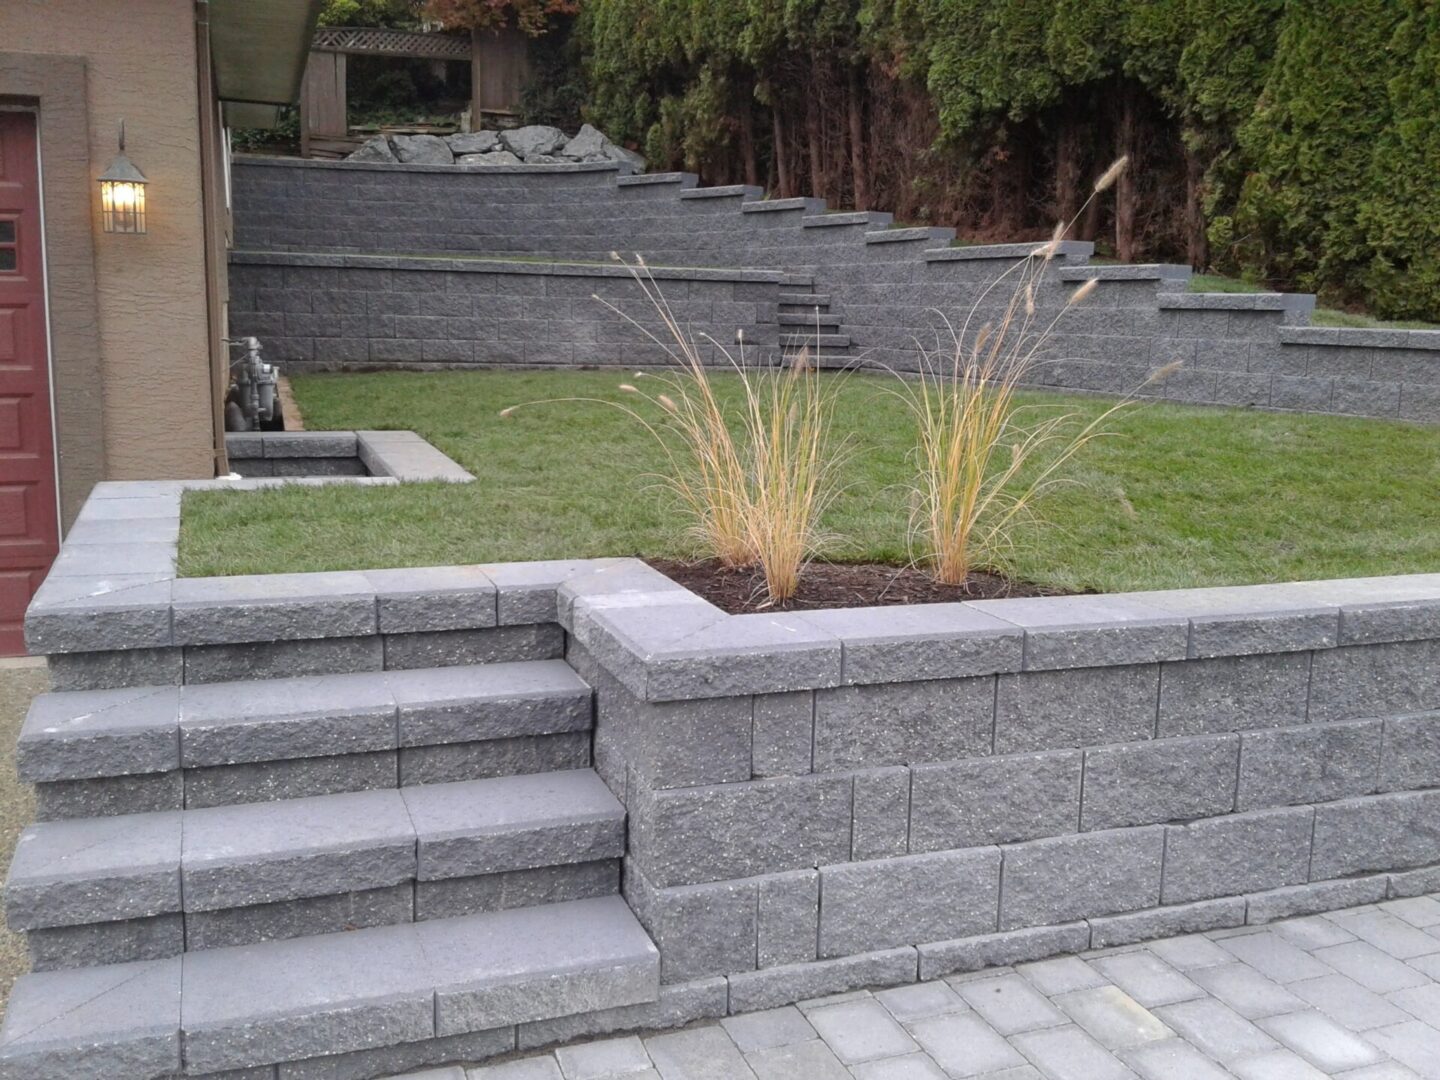 Elegant landscaped garden with gray stone steps, retaining walls, and manicured grass, featuring ornamental grasses and a fountain near a house.